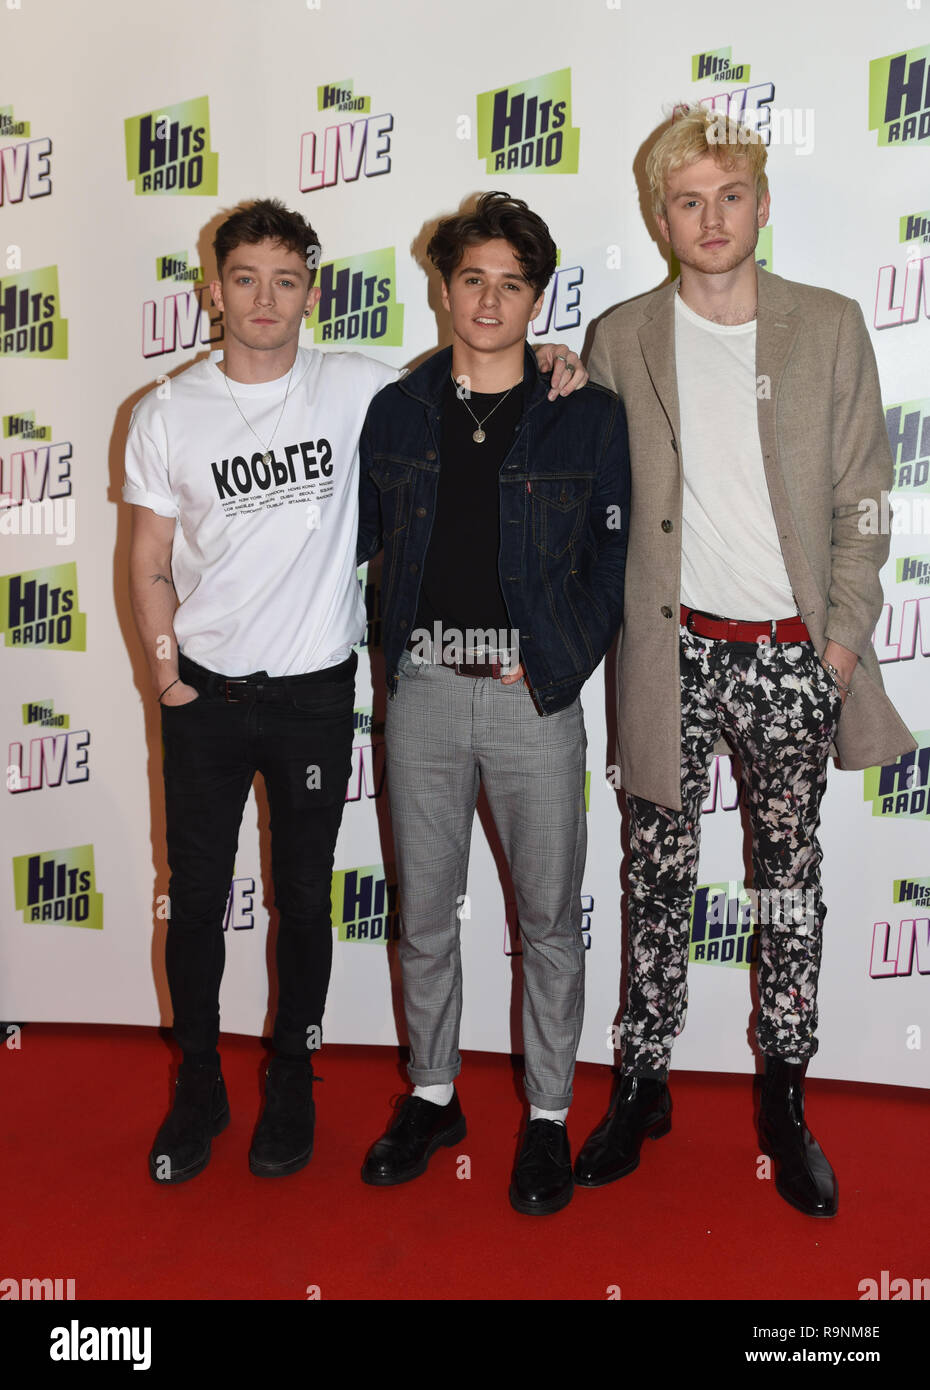 Celebrities arrive at Hits Radio Live 2018 at Manchester Arena in  Manchester Featuring: the vamps Where: Liverpool, United Kingdom When: 25  Nov 2018 Credit: Graham Finney/WENN Stock Photo - Alamy